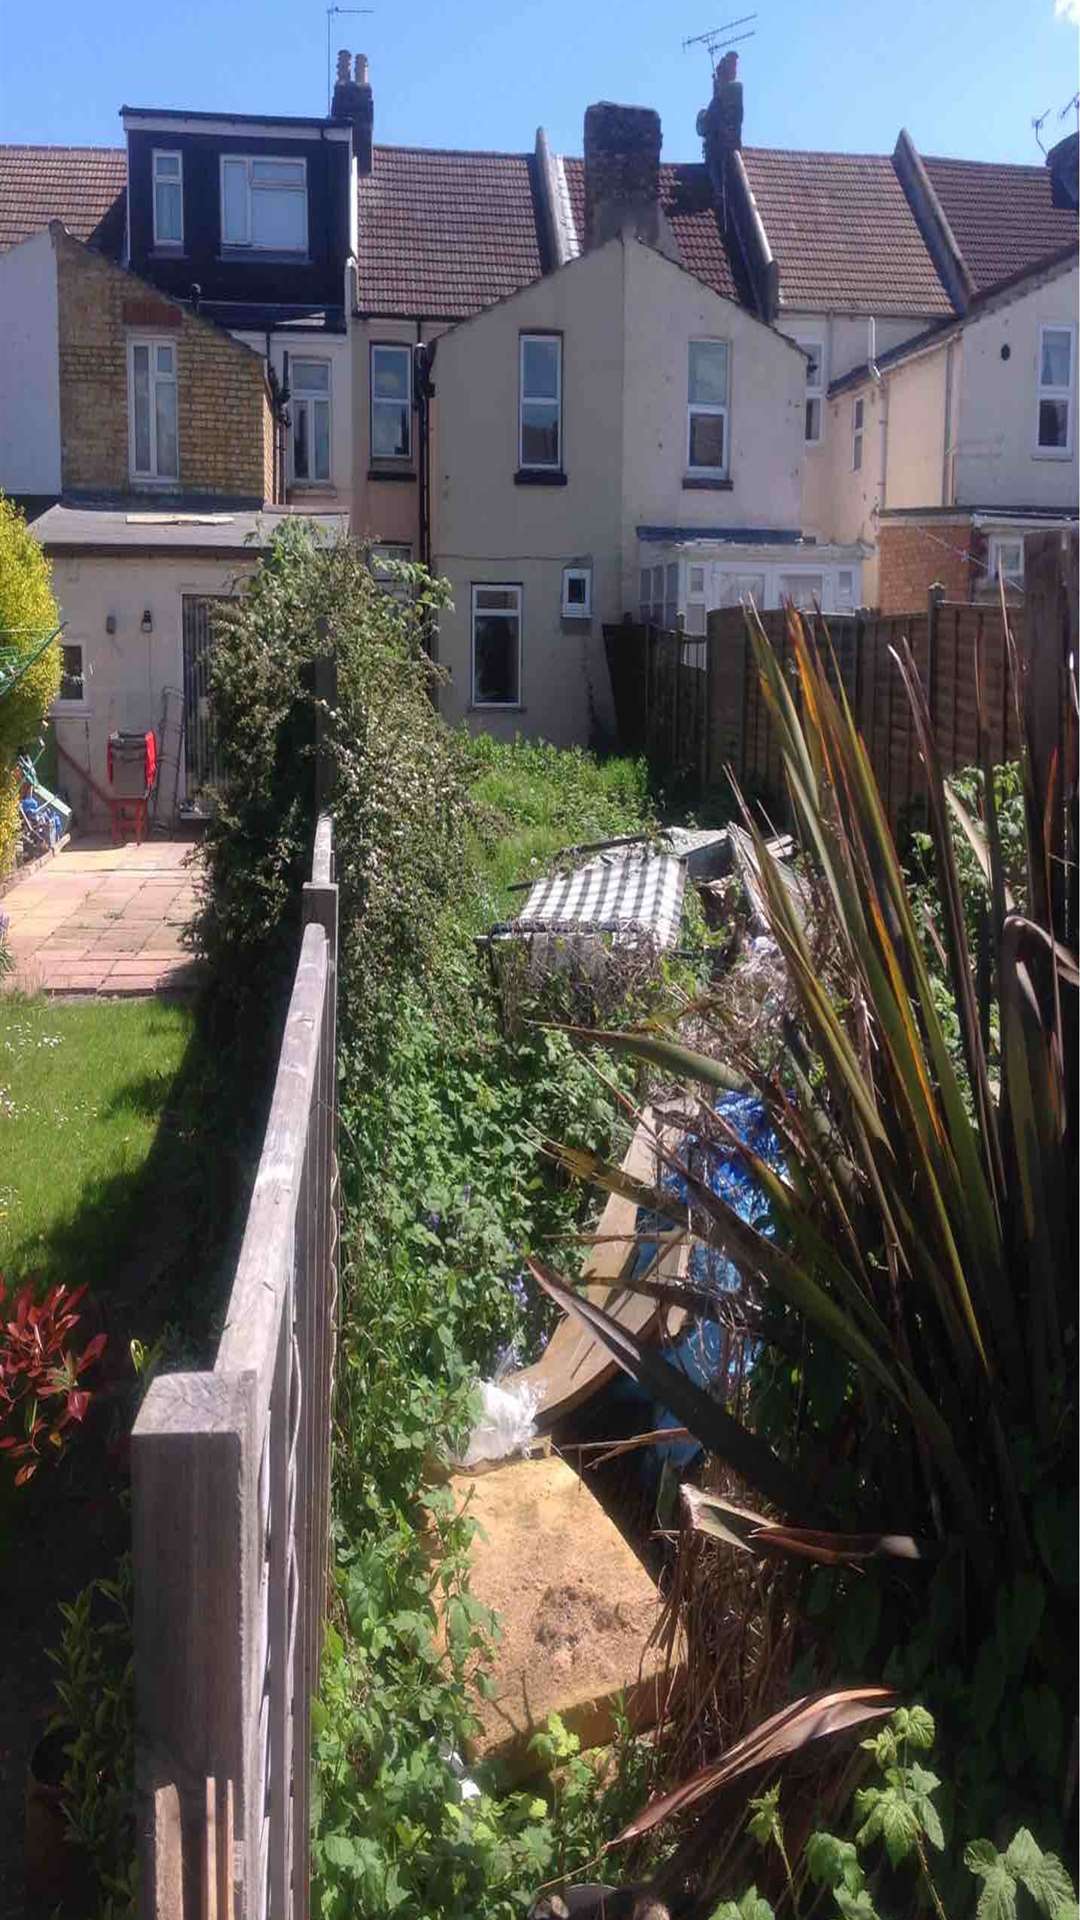 Muhammad Seyed was fined for not tidying up his garden and has now cleared it